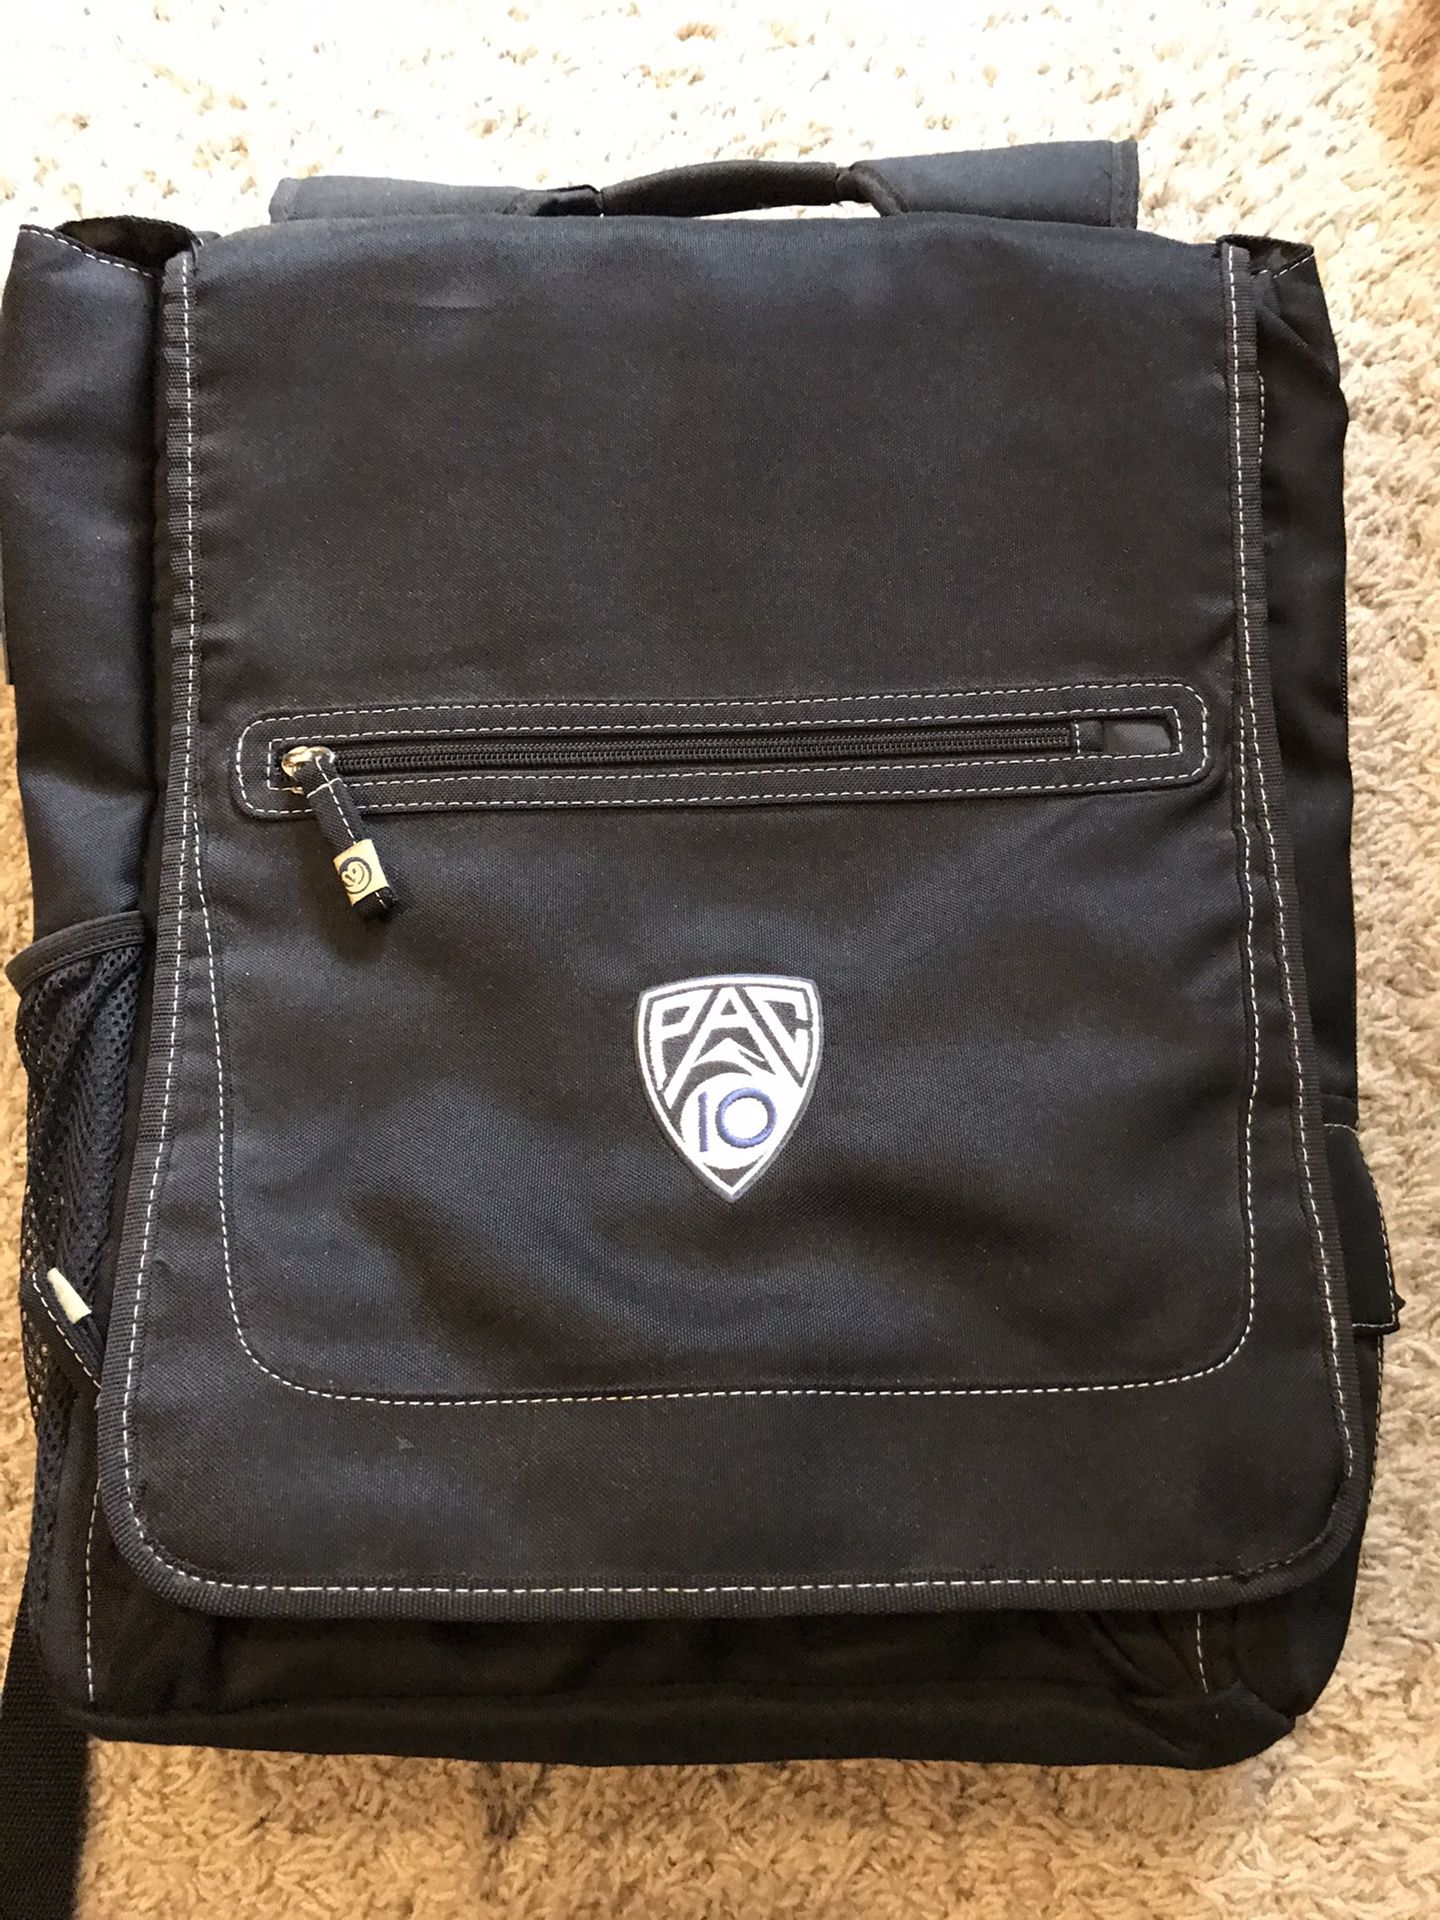 PAC 10 Laptop/Computer Backpack